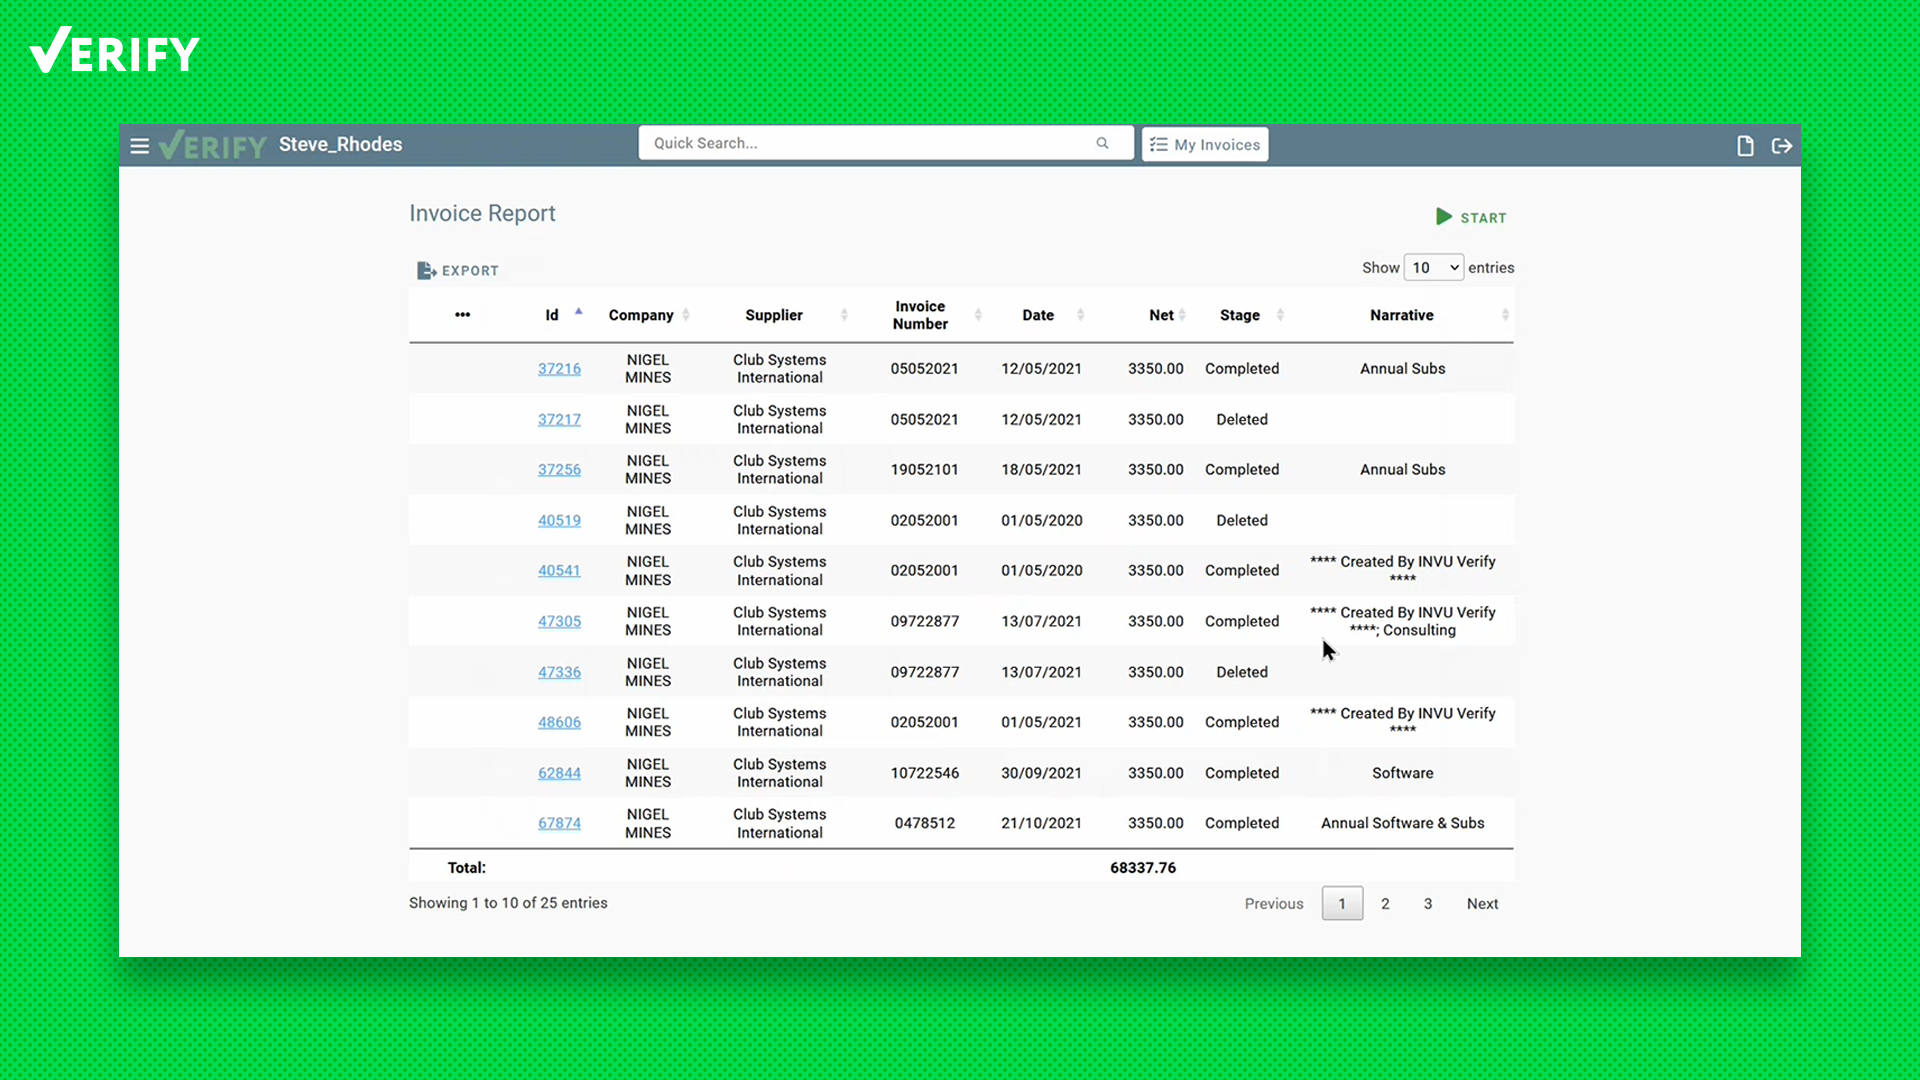 Agilico Verify's fully customisable reporting allows you to run reports on a myriad of settings. You can pick and choose the data fields in a report and it can be exported to Microsoft Excel for further insights.